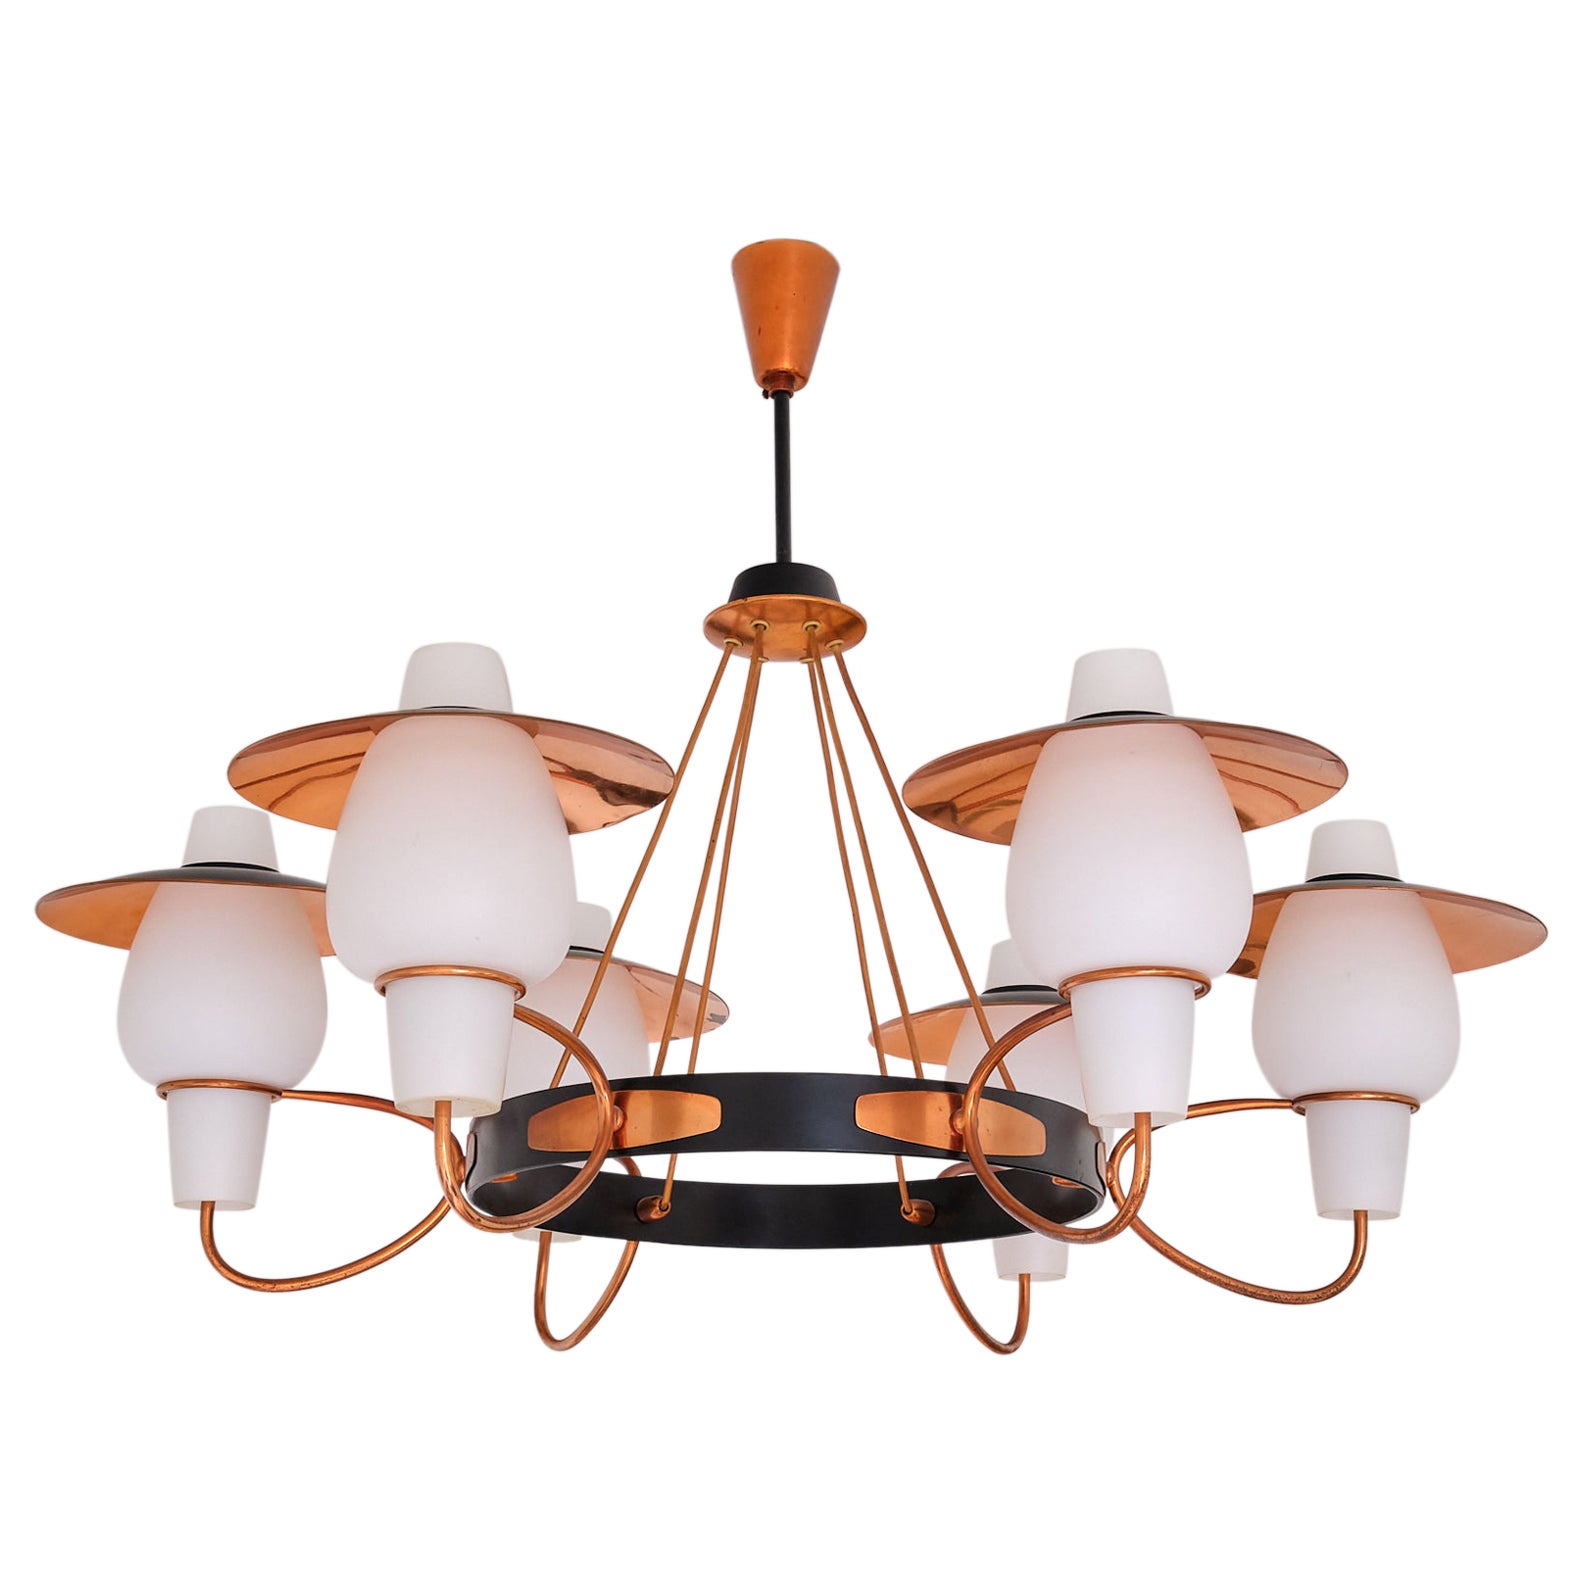 Danish Modern Six Arm Chandelier in Copper and Opaline Glass, 1960s For Sale